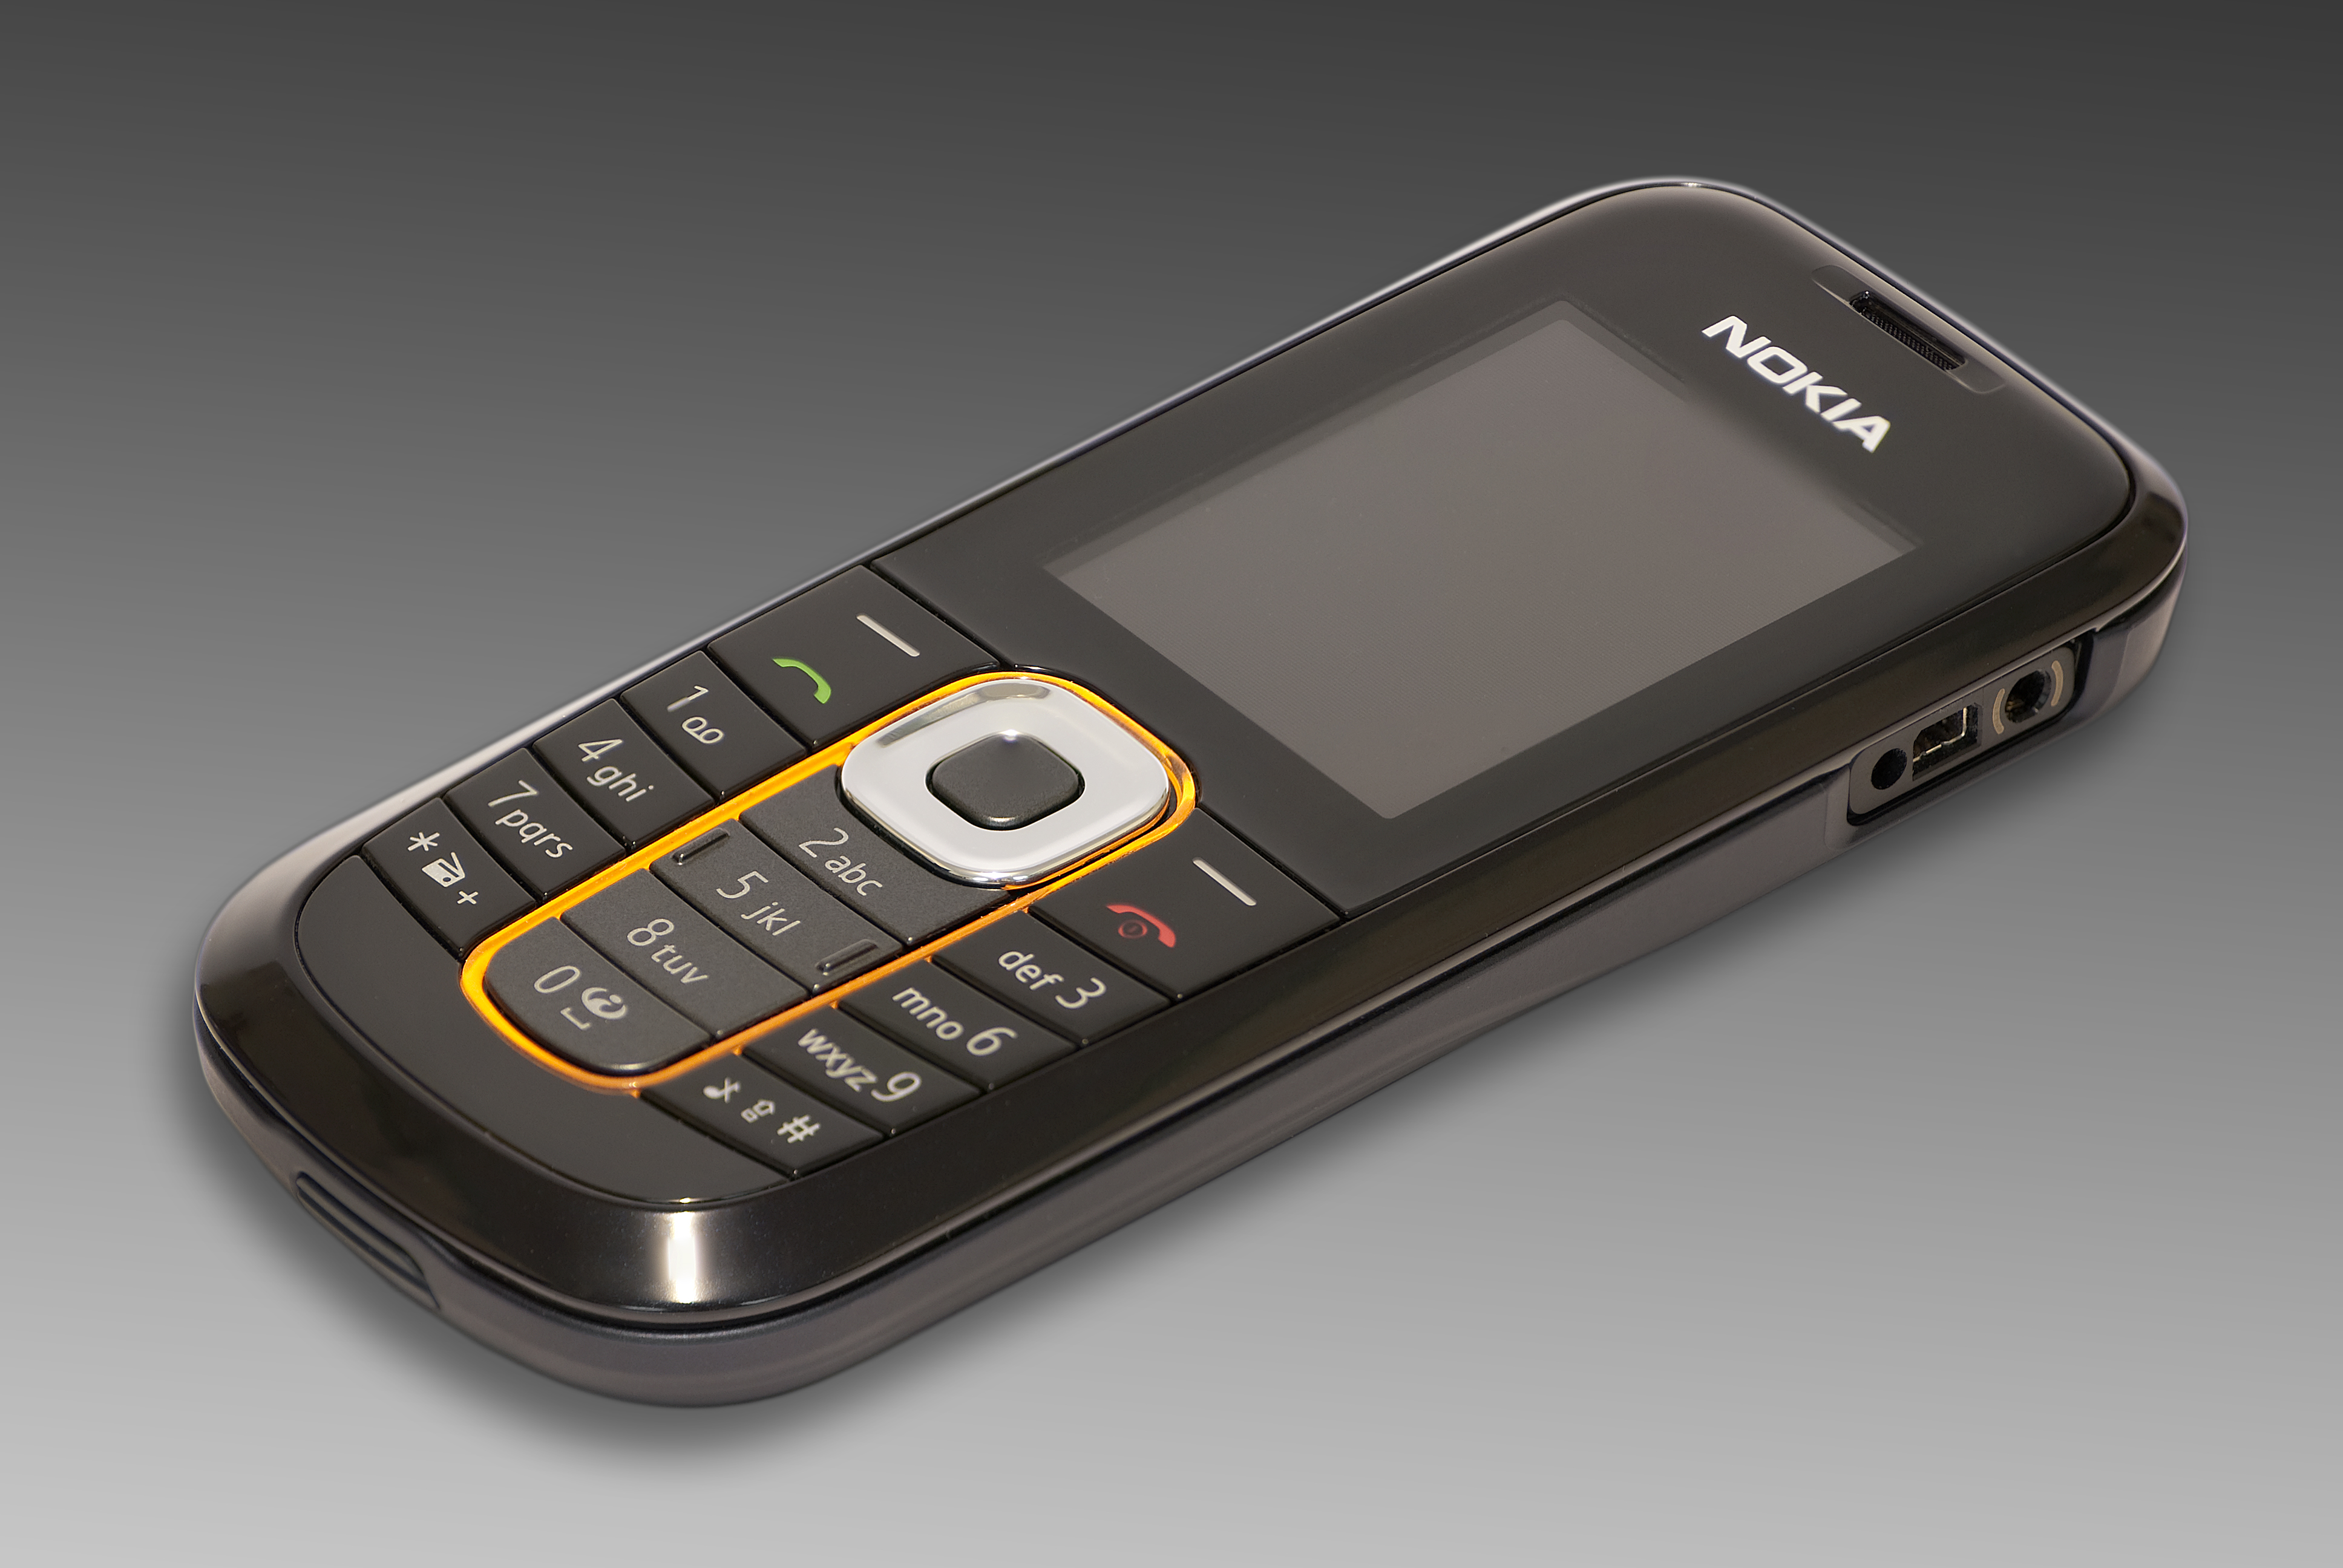 Call Recorder For Nokia 2730 Classic Free Download